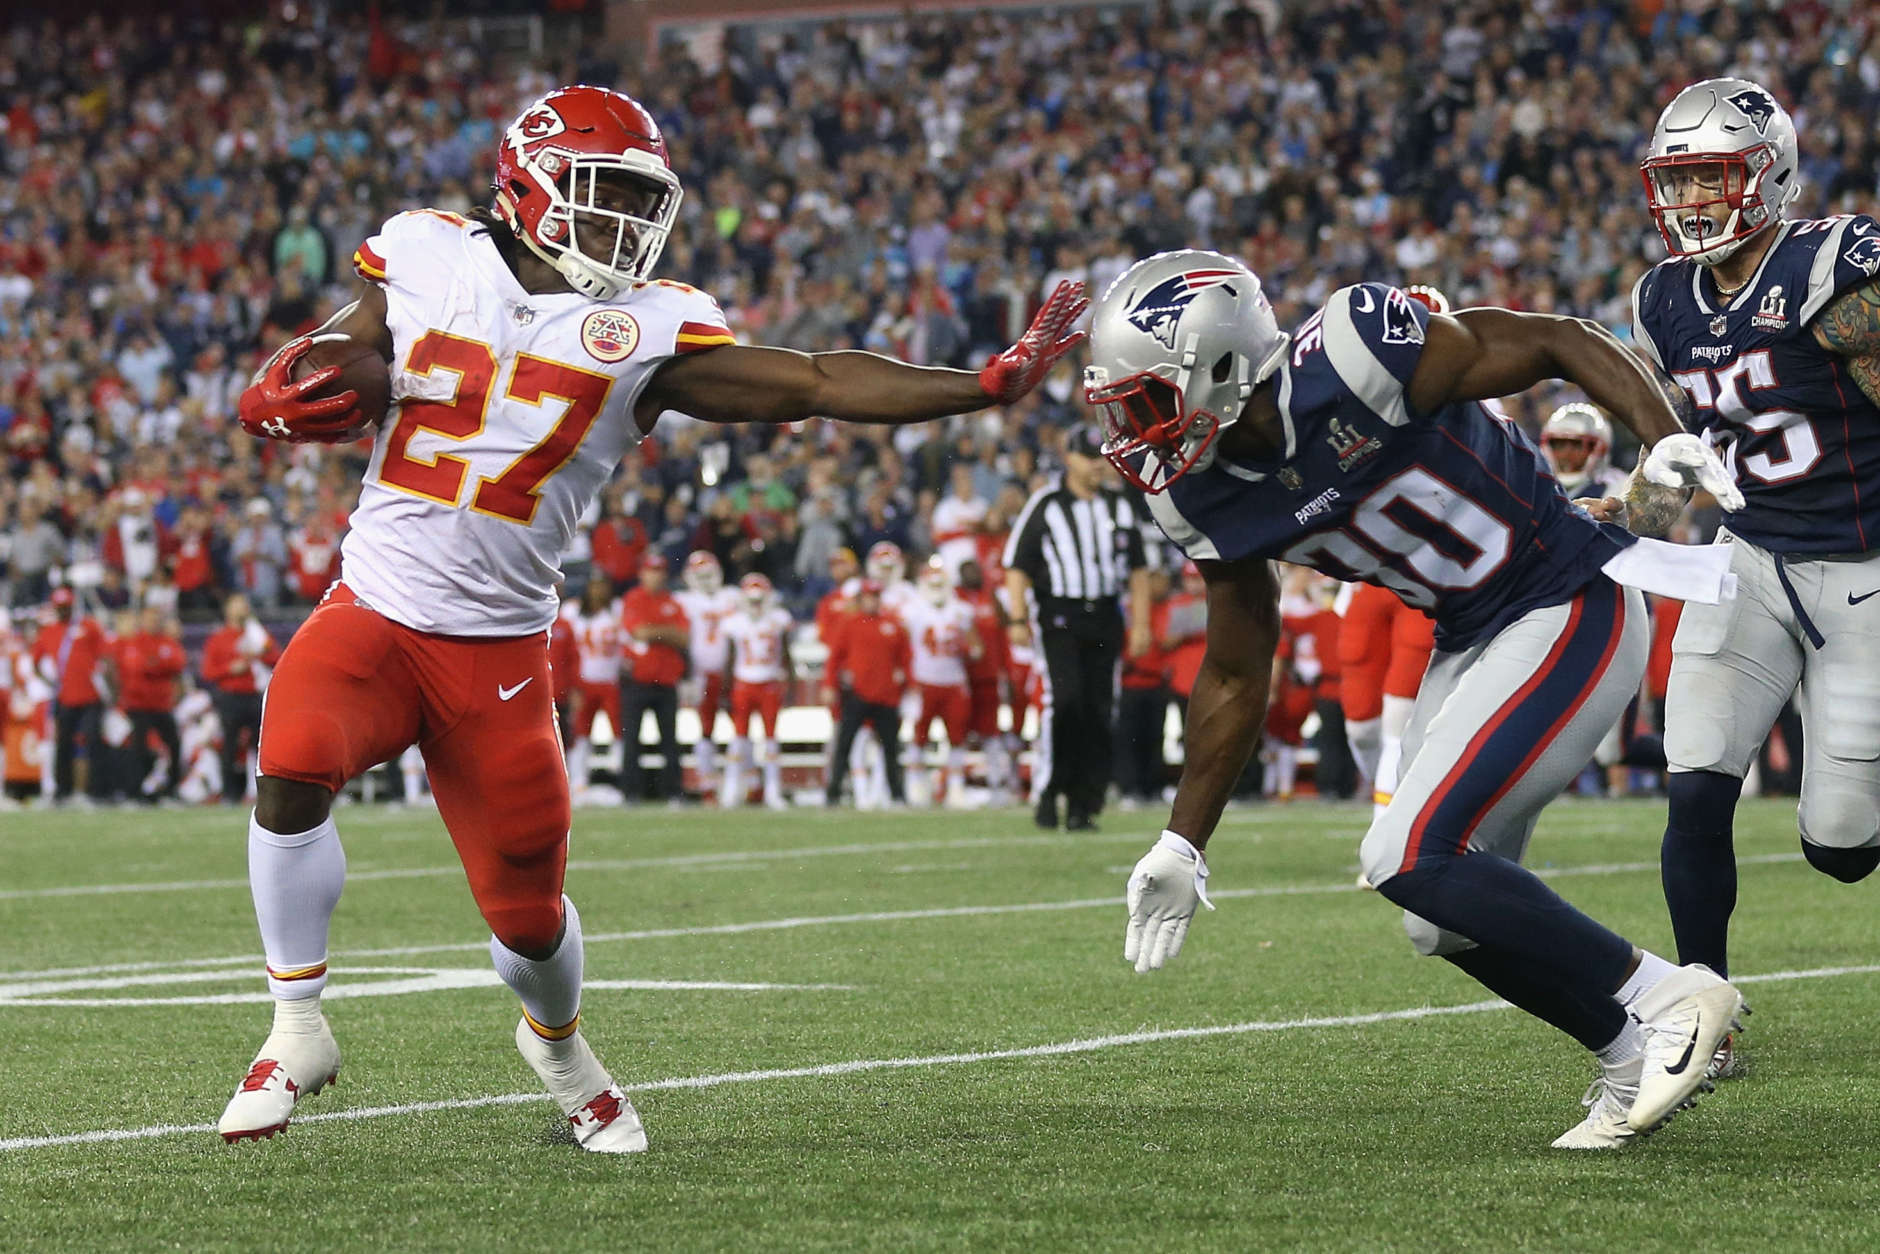 FOXBORO, MA - SEPTEMBER 07:  Kareem Hunt #27 of the Kansas City Chiefs stiff arms Duron Harmon #30 of the New England Patriots as he runs for a 4-yard rushing touchdown during the fourth quarter against the New England Patriots at Gillette Stadium on September 7, 2017 in Foxboro, Massachusetts.  (Photo by Maddie Meyer/Getty Images)